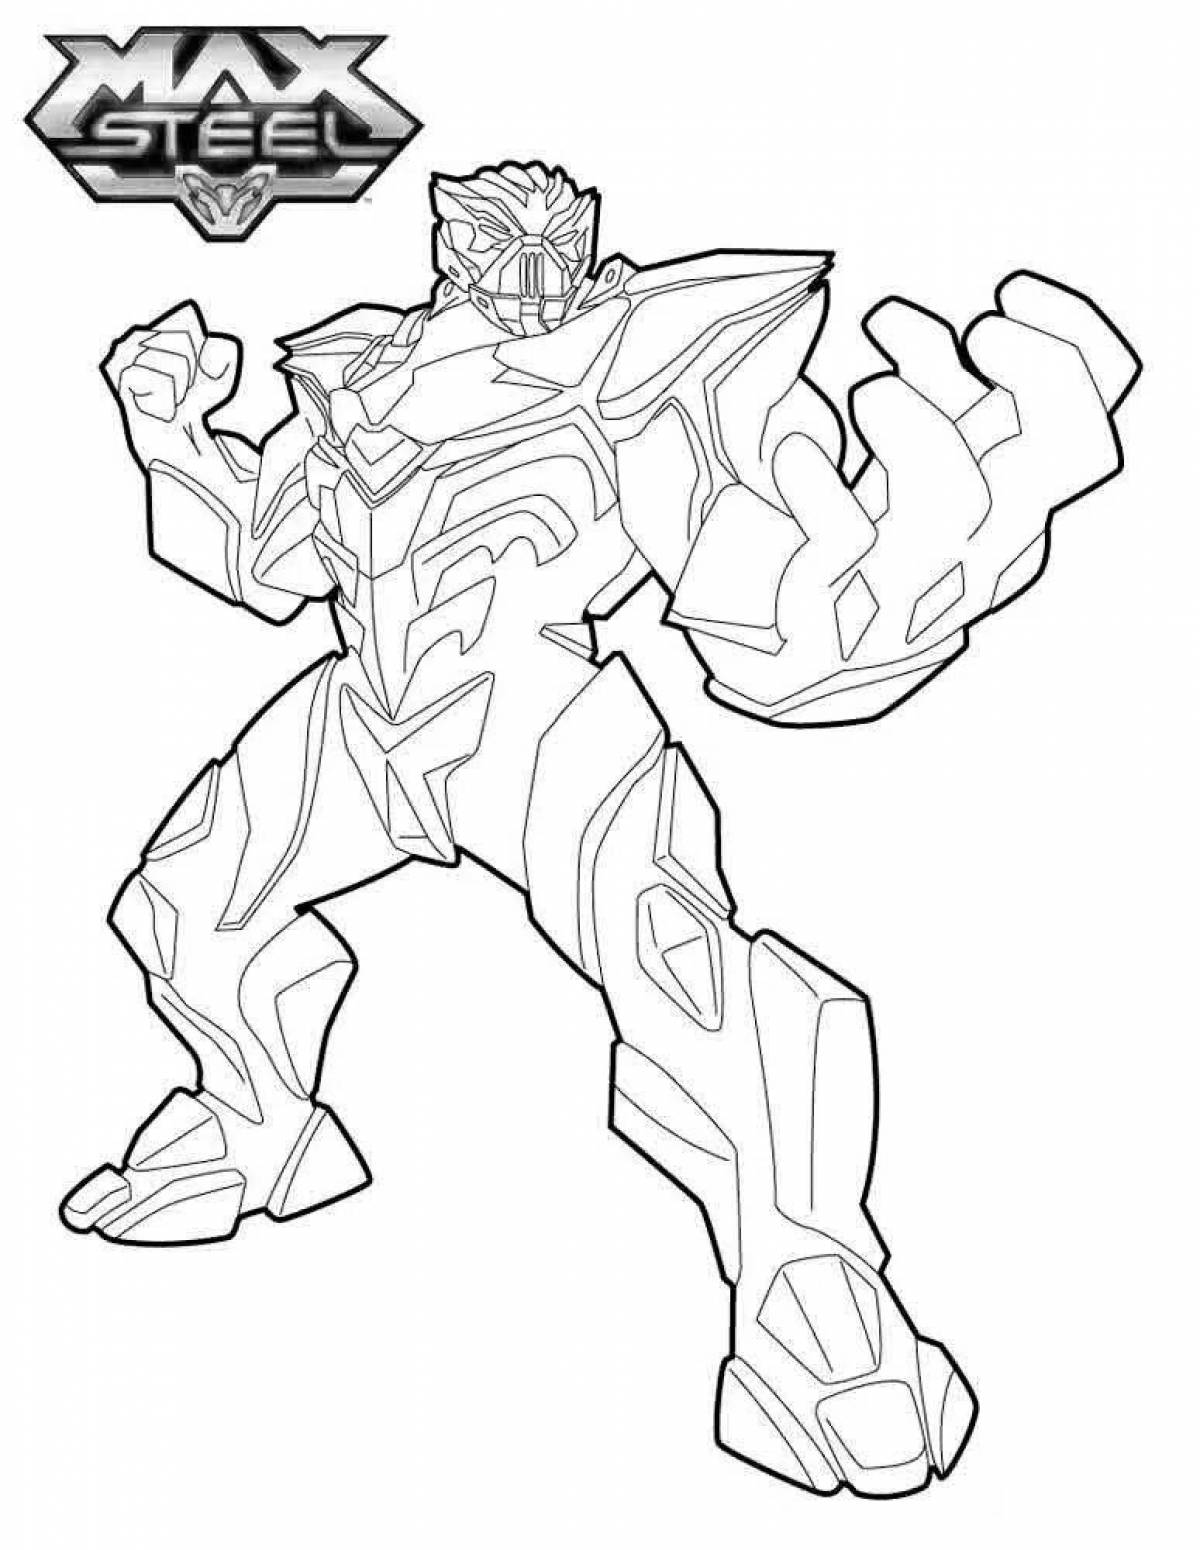 Coloring page of vibrant fusion max